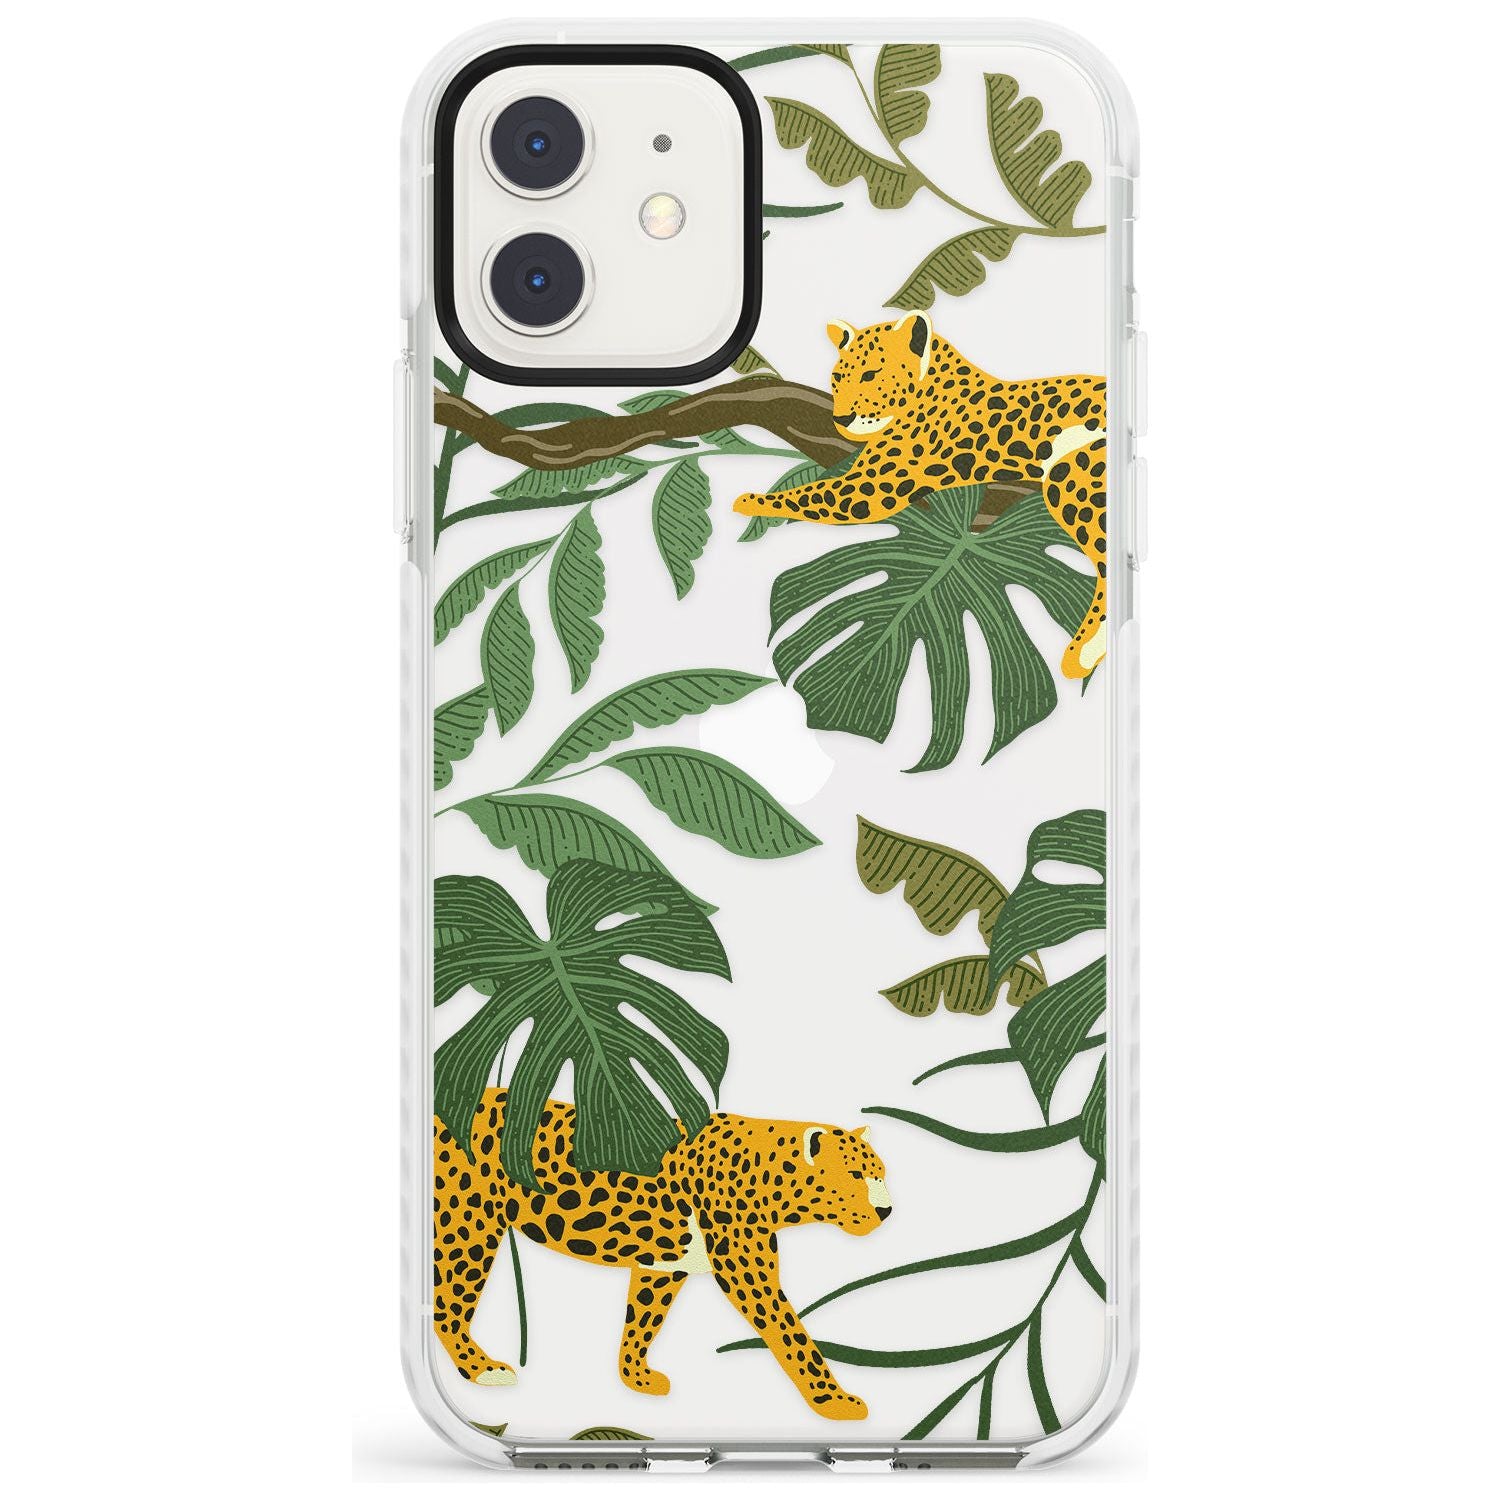 Two Jaguars & Foliage Jungle Cat Pattern Impact Phone Case for iPhone 11